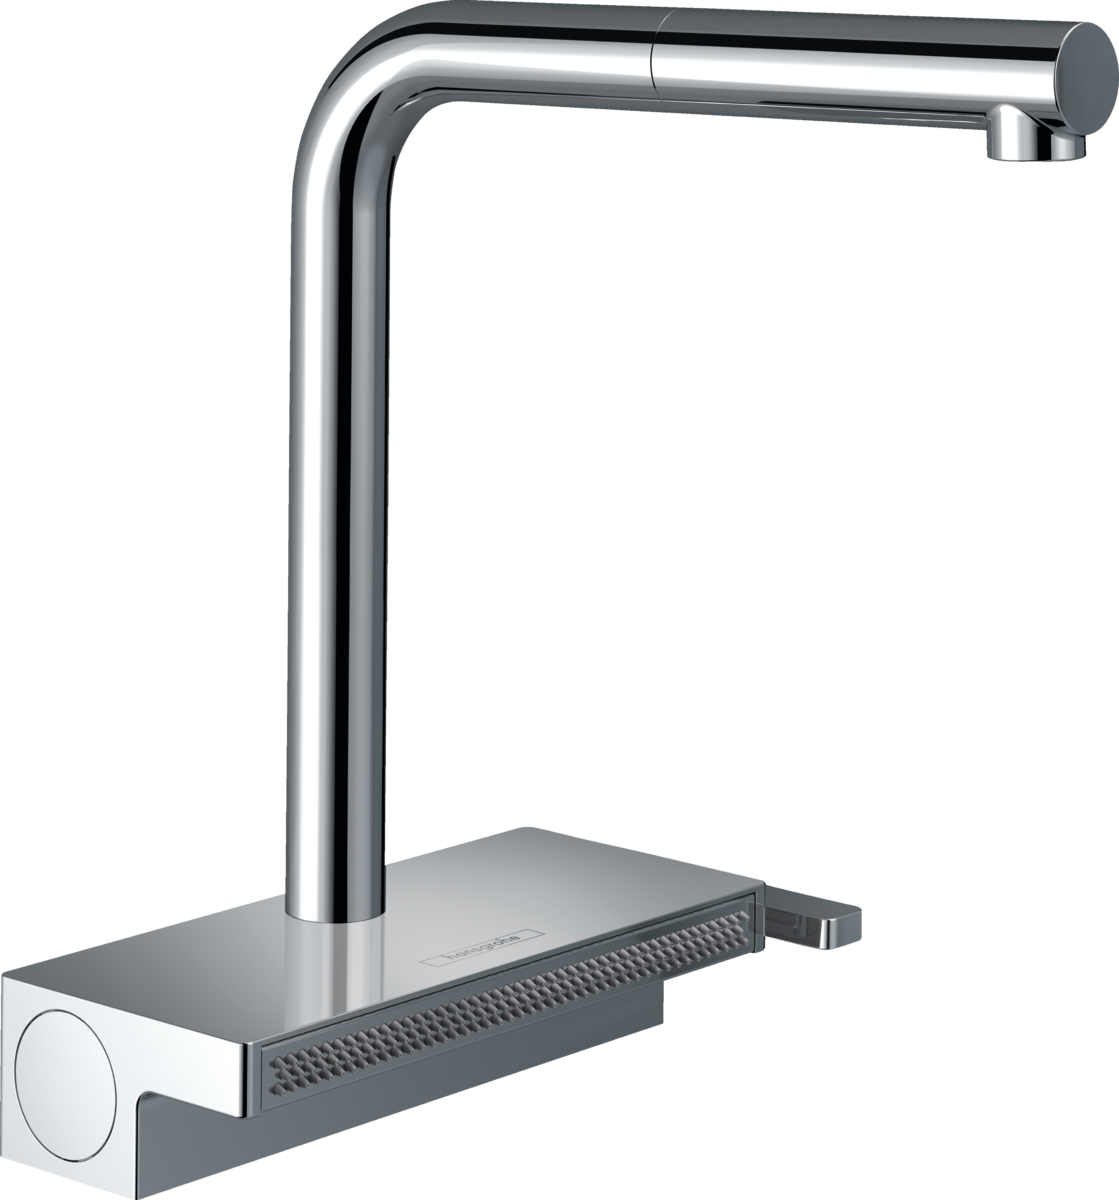 Picture of HANSGROHE Aquno Select M81 Single lever kitchen mixer 250, pull-out spout, 2jet, sBox #73830000 - Chrome